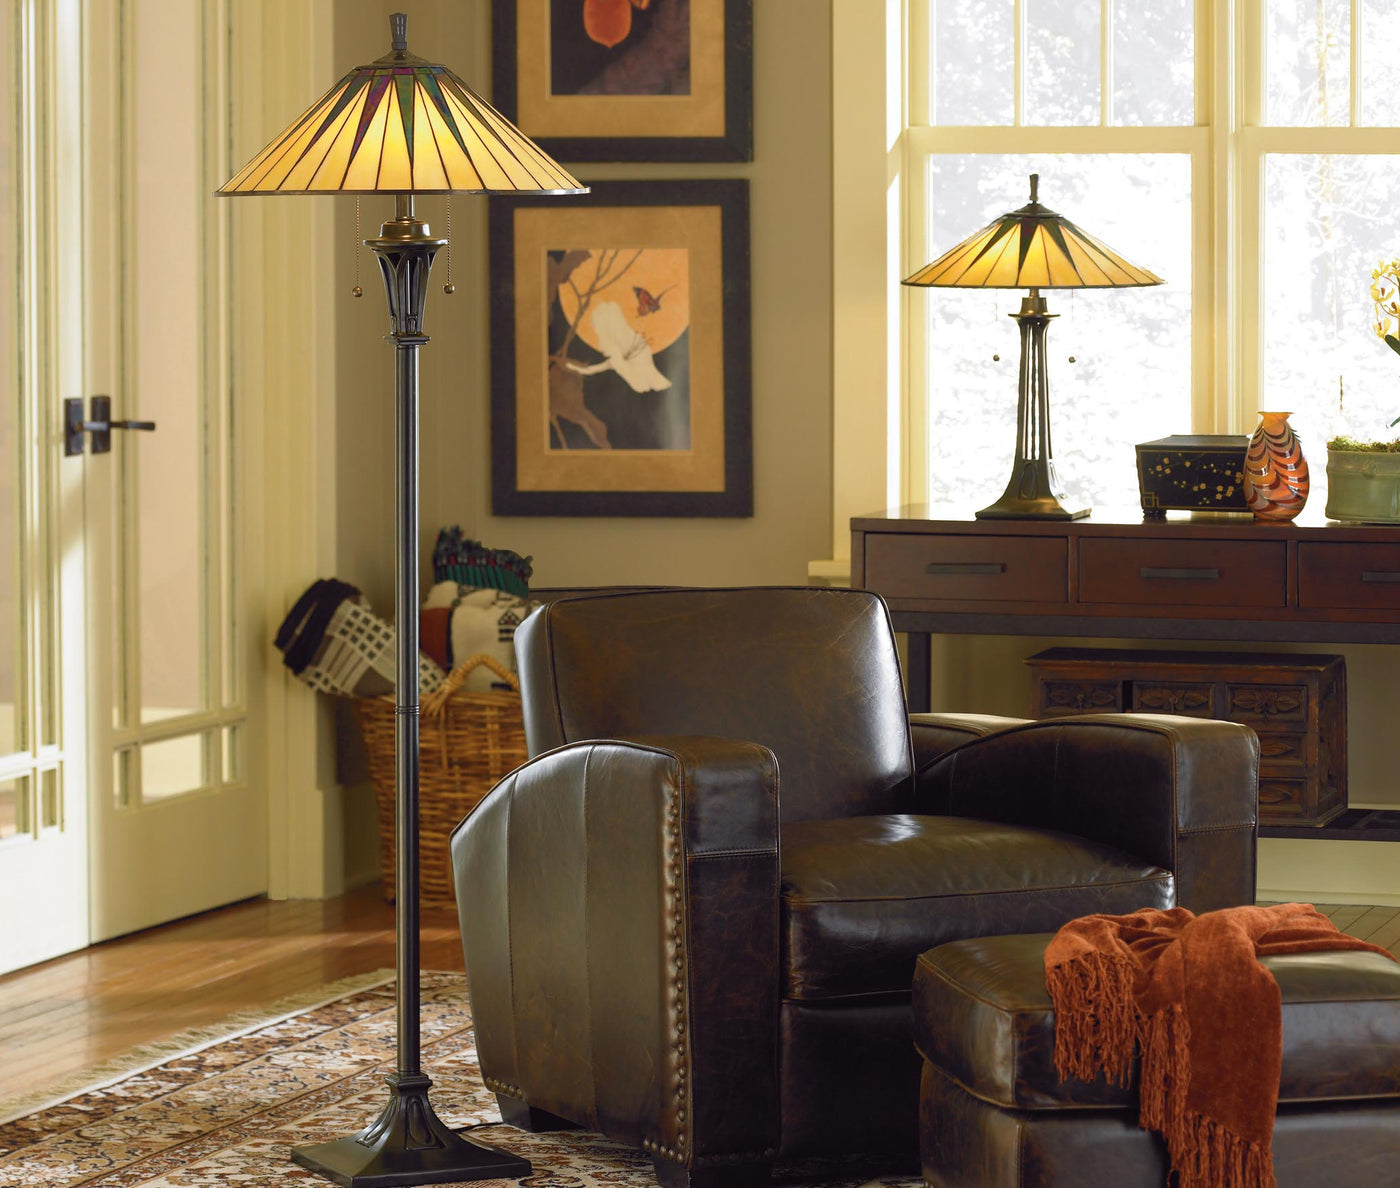 A tall floor lamp sits next to a dark brown leather chair and ottoman